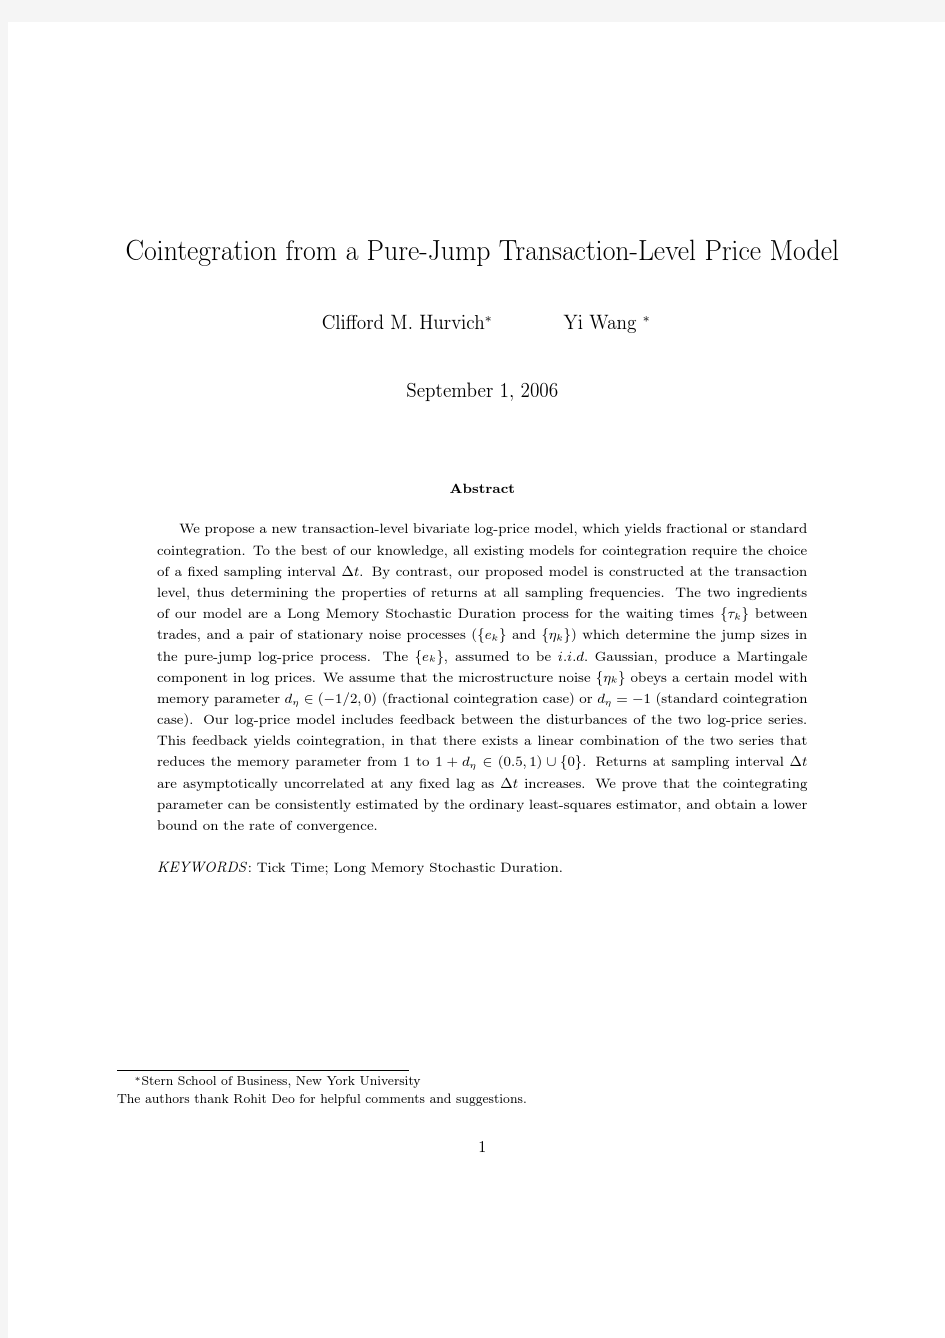 Cointegration from a Pure-Jump Transaction-Level Price Model